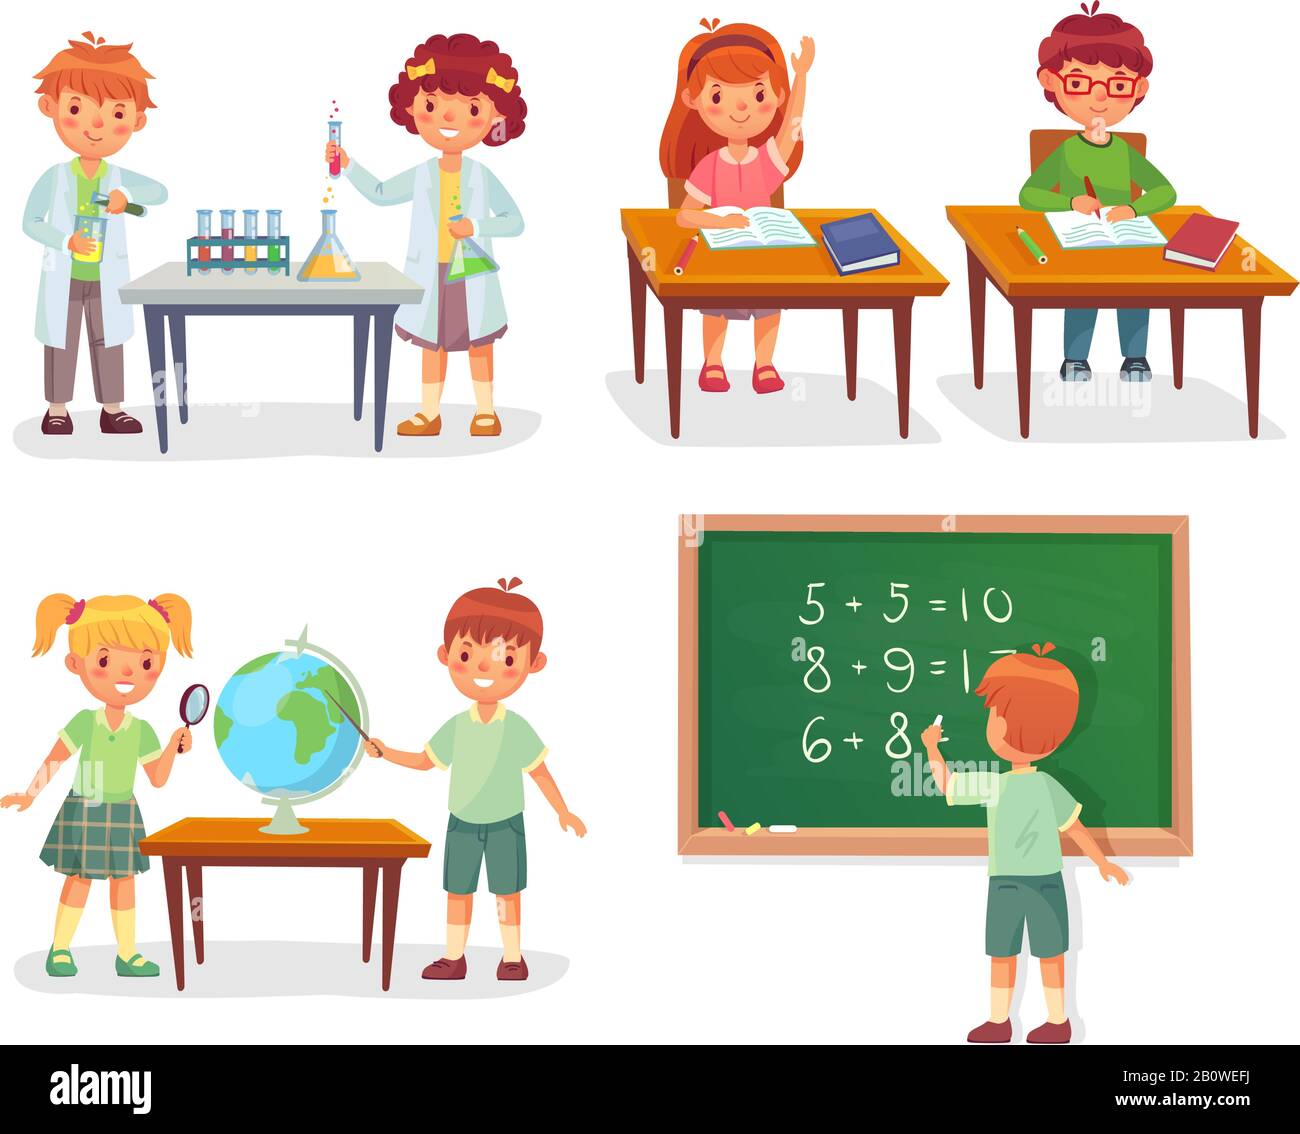 Kids on school lesson. Primary schools pupils on chemistry lessons, learn geography globe or sit at desk vector cartoon illustration Stock Vector